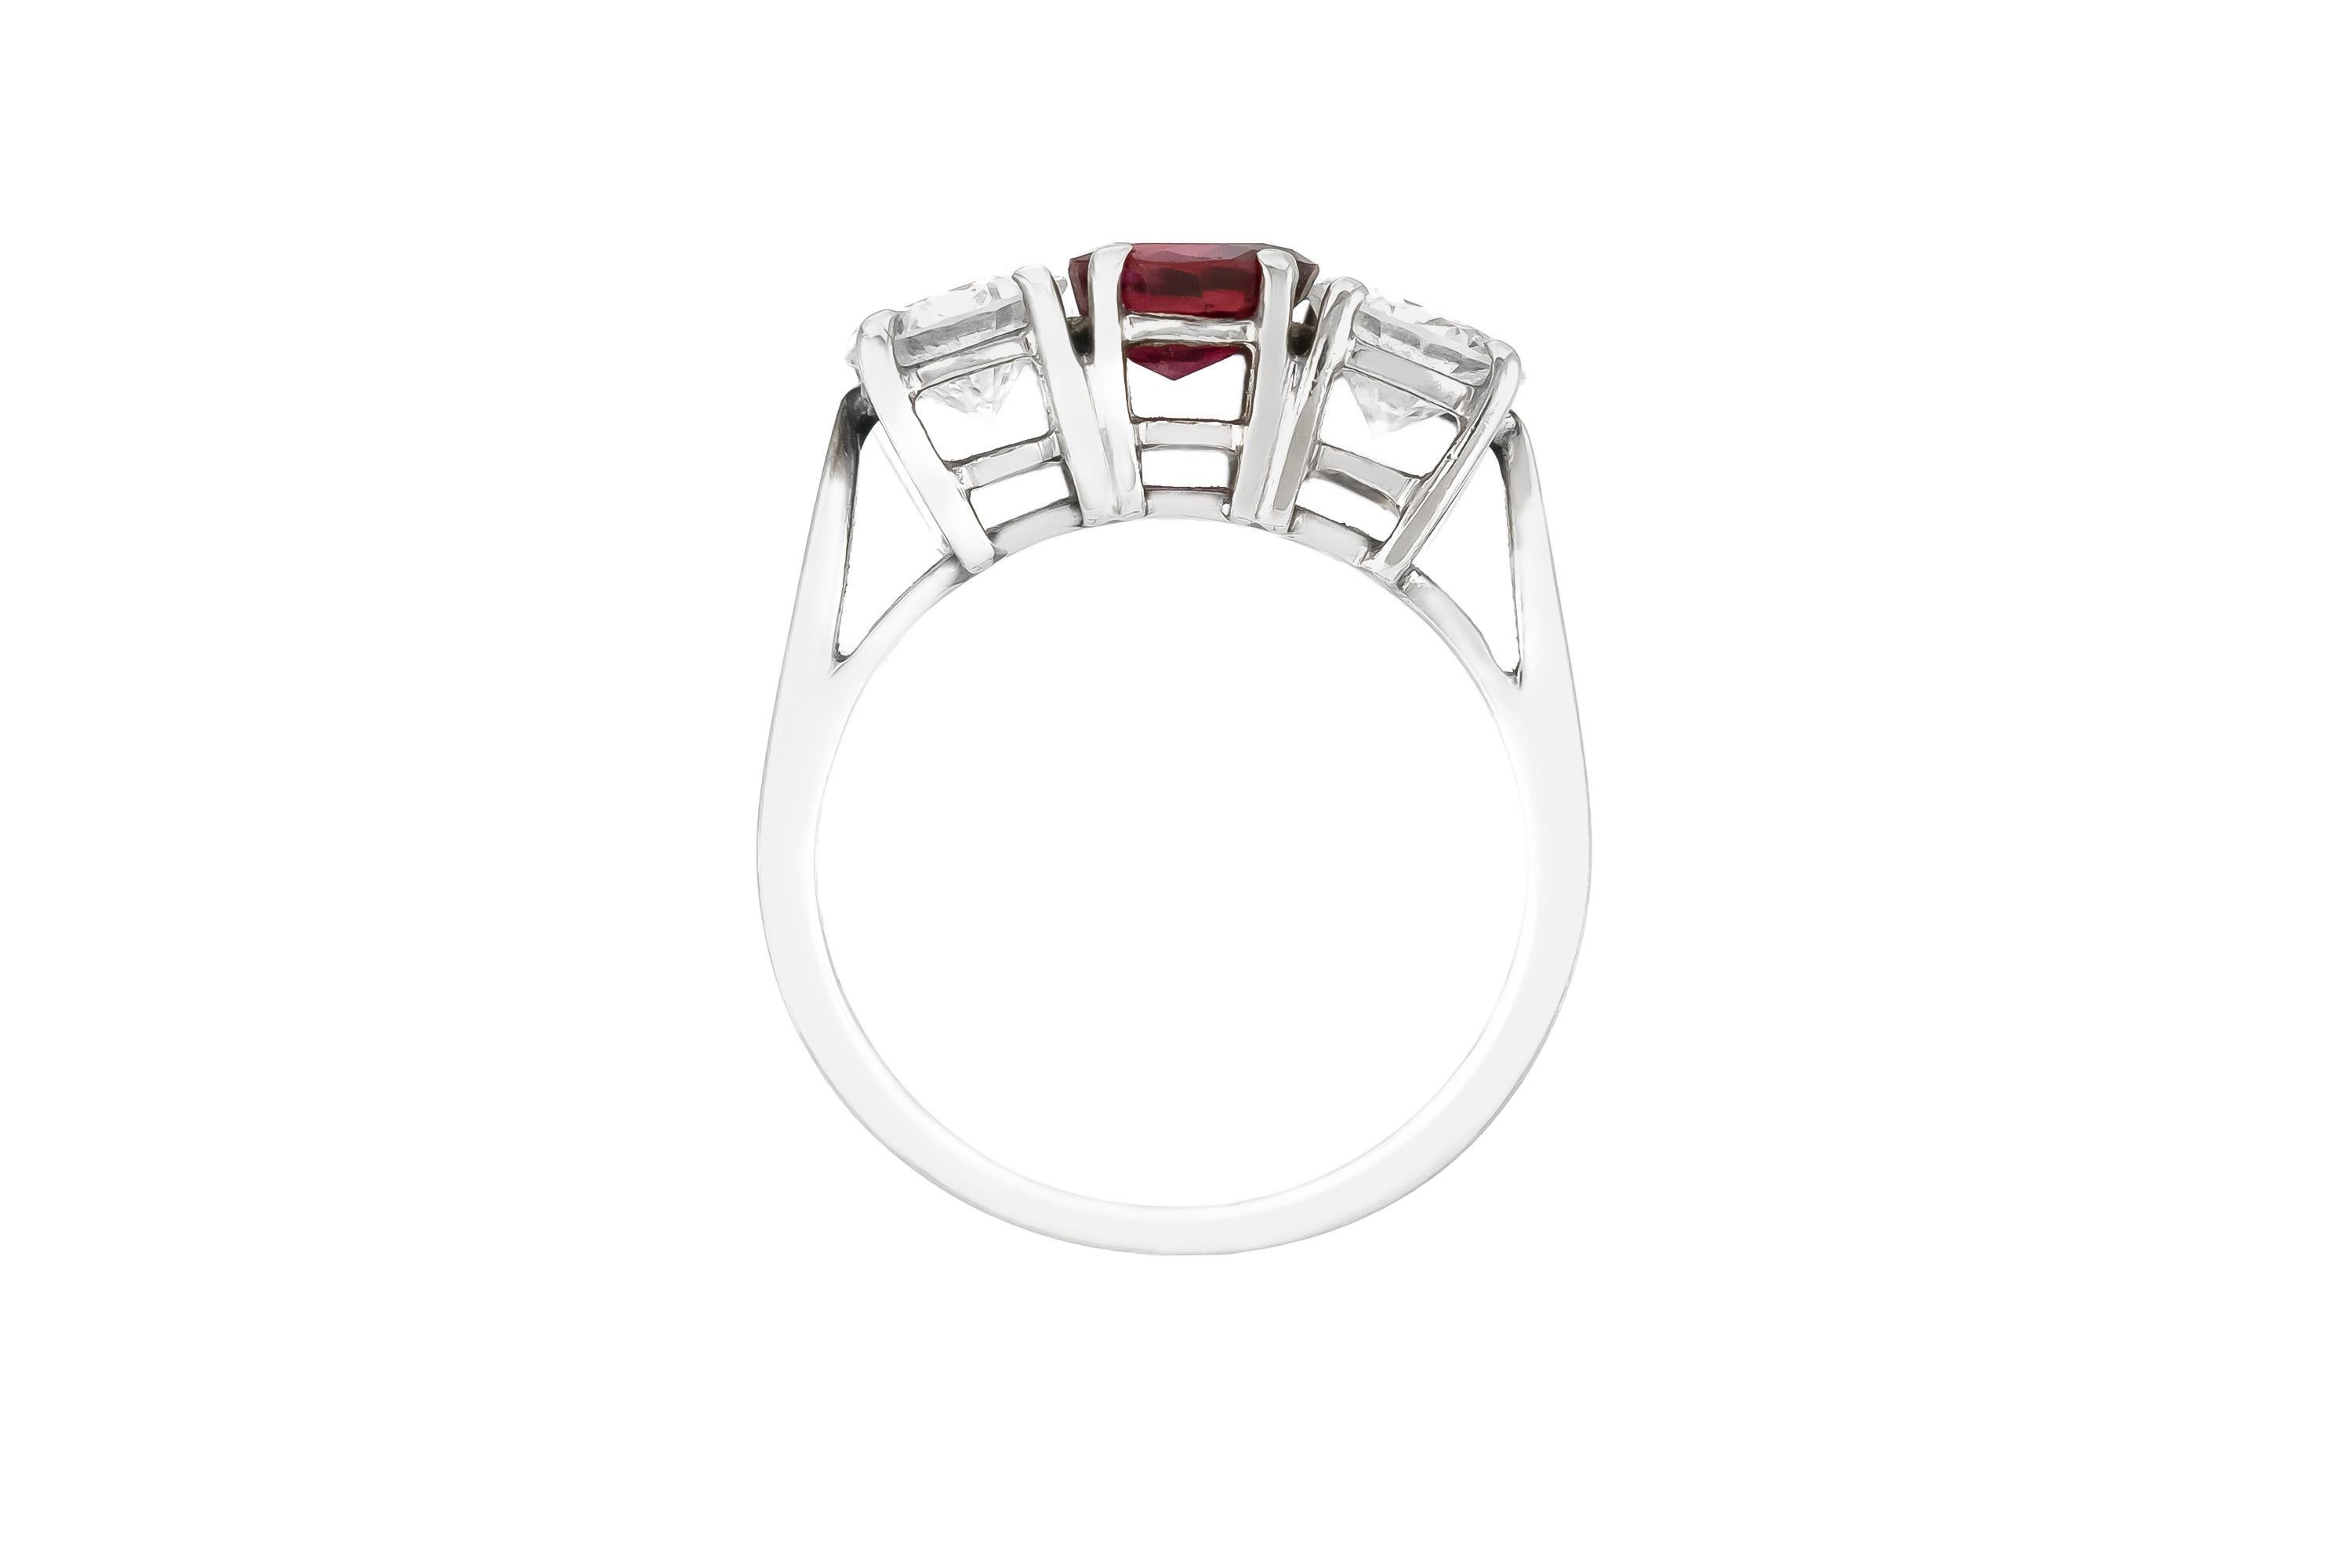 The ring is finely crafted in 14k white gold with center ruby weighing approximately total of 0.90 carat and two side diamonds weighing approximately total of 1.60 carat.
Circa 1970.